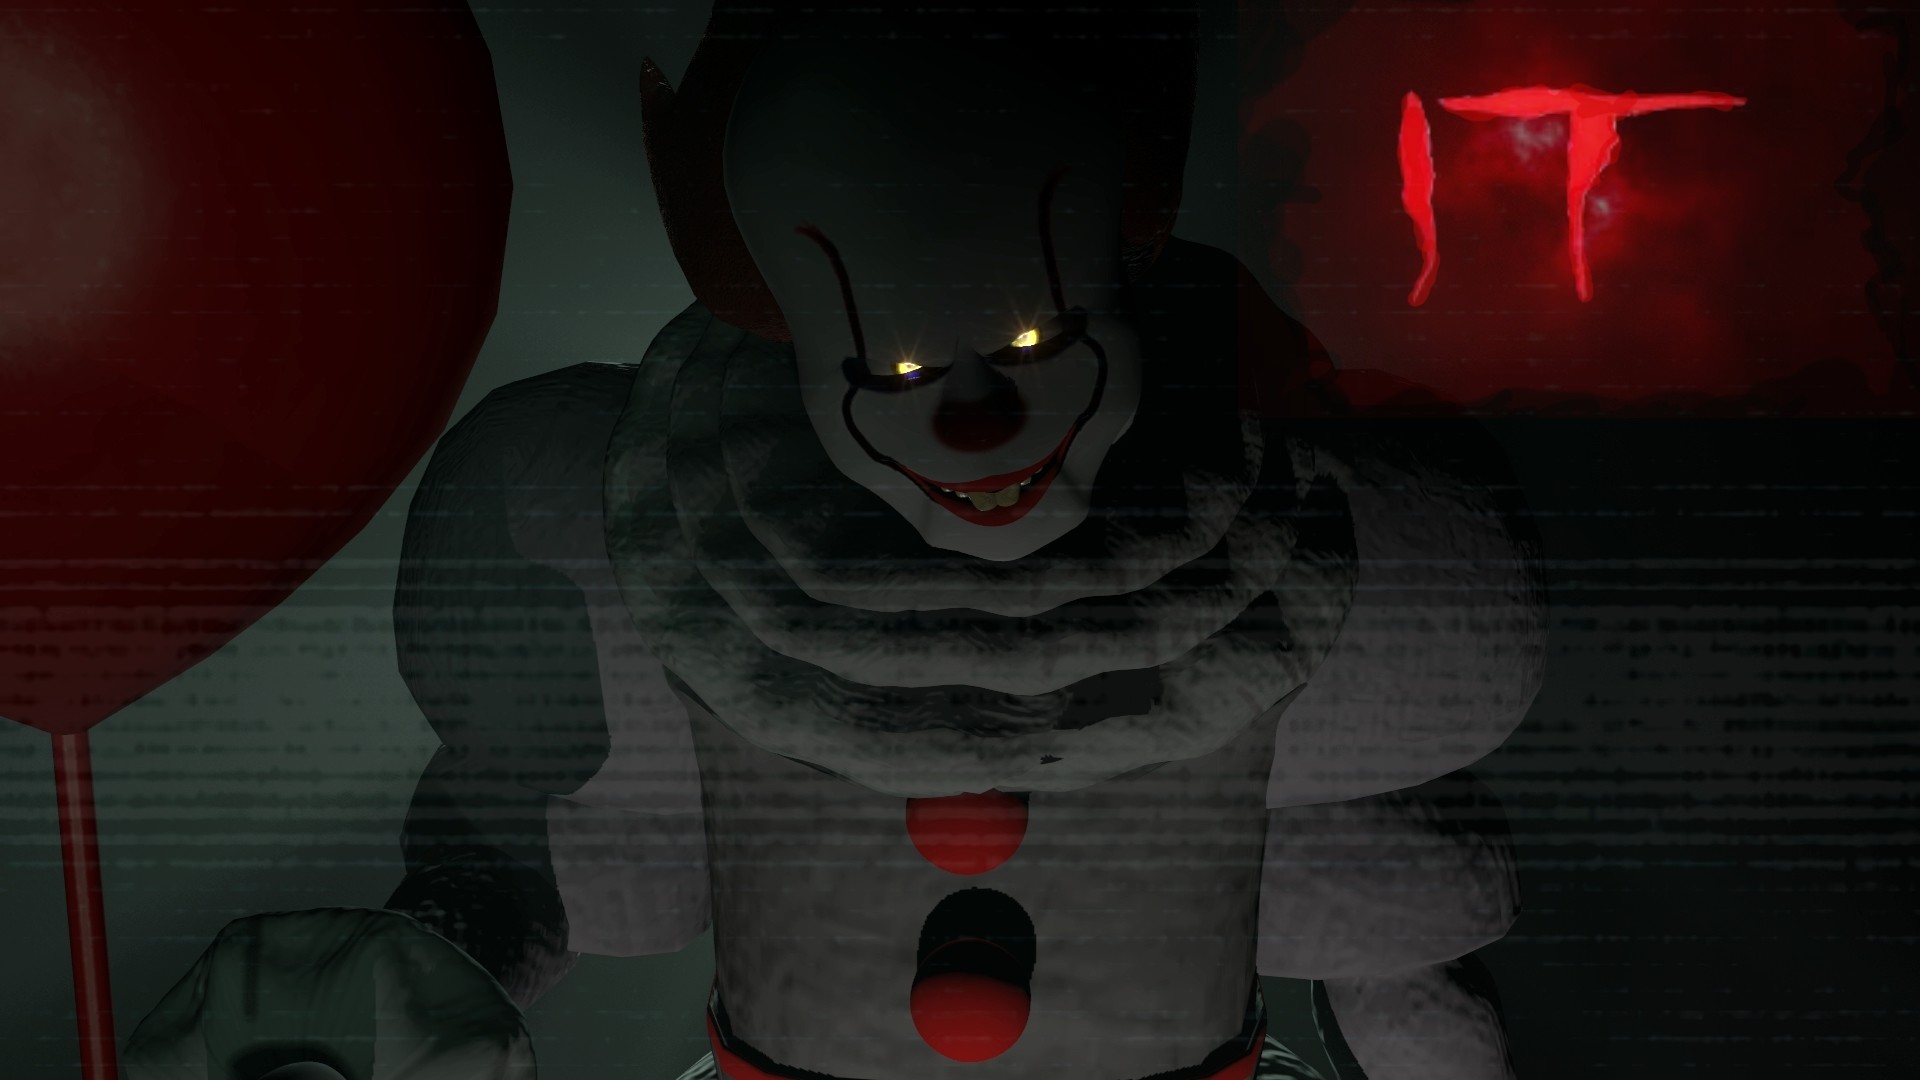 1920x1080 ... Pennywise the Dancing Clown [SFM POSTER] by Terkku123